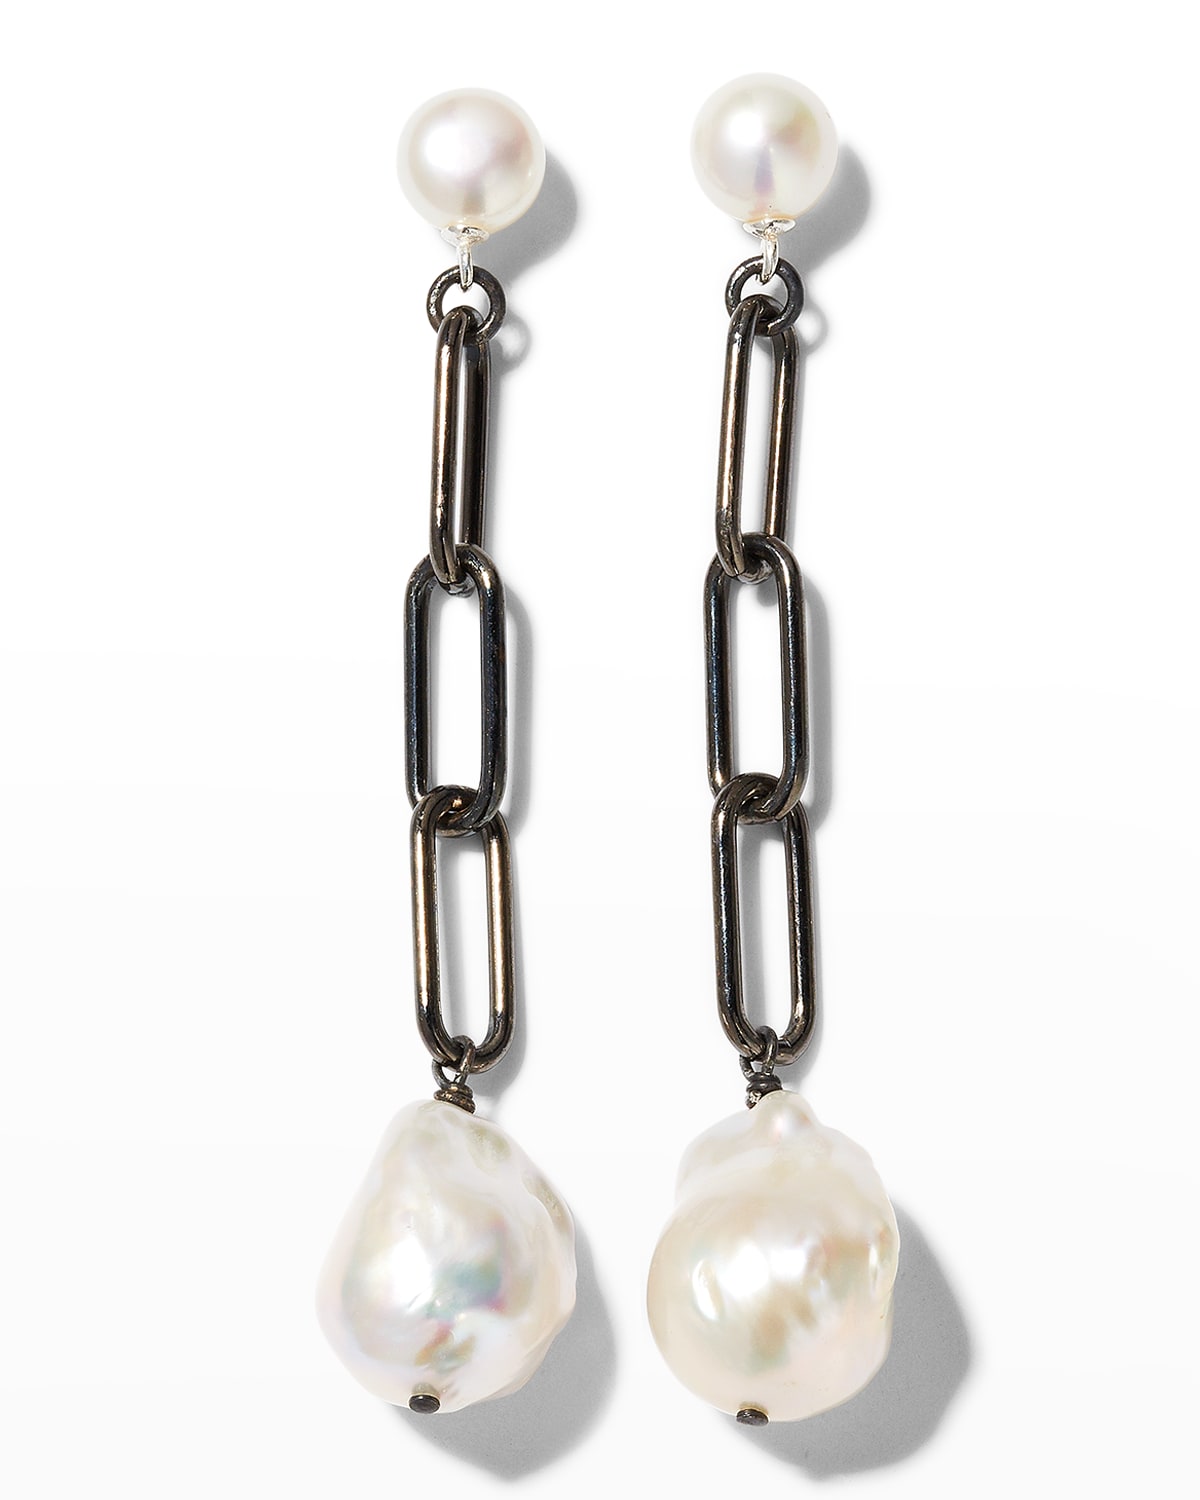 Margo Morrison Baroque Pearl Drop Earrings with Paperclip Chain